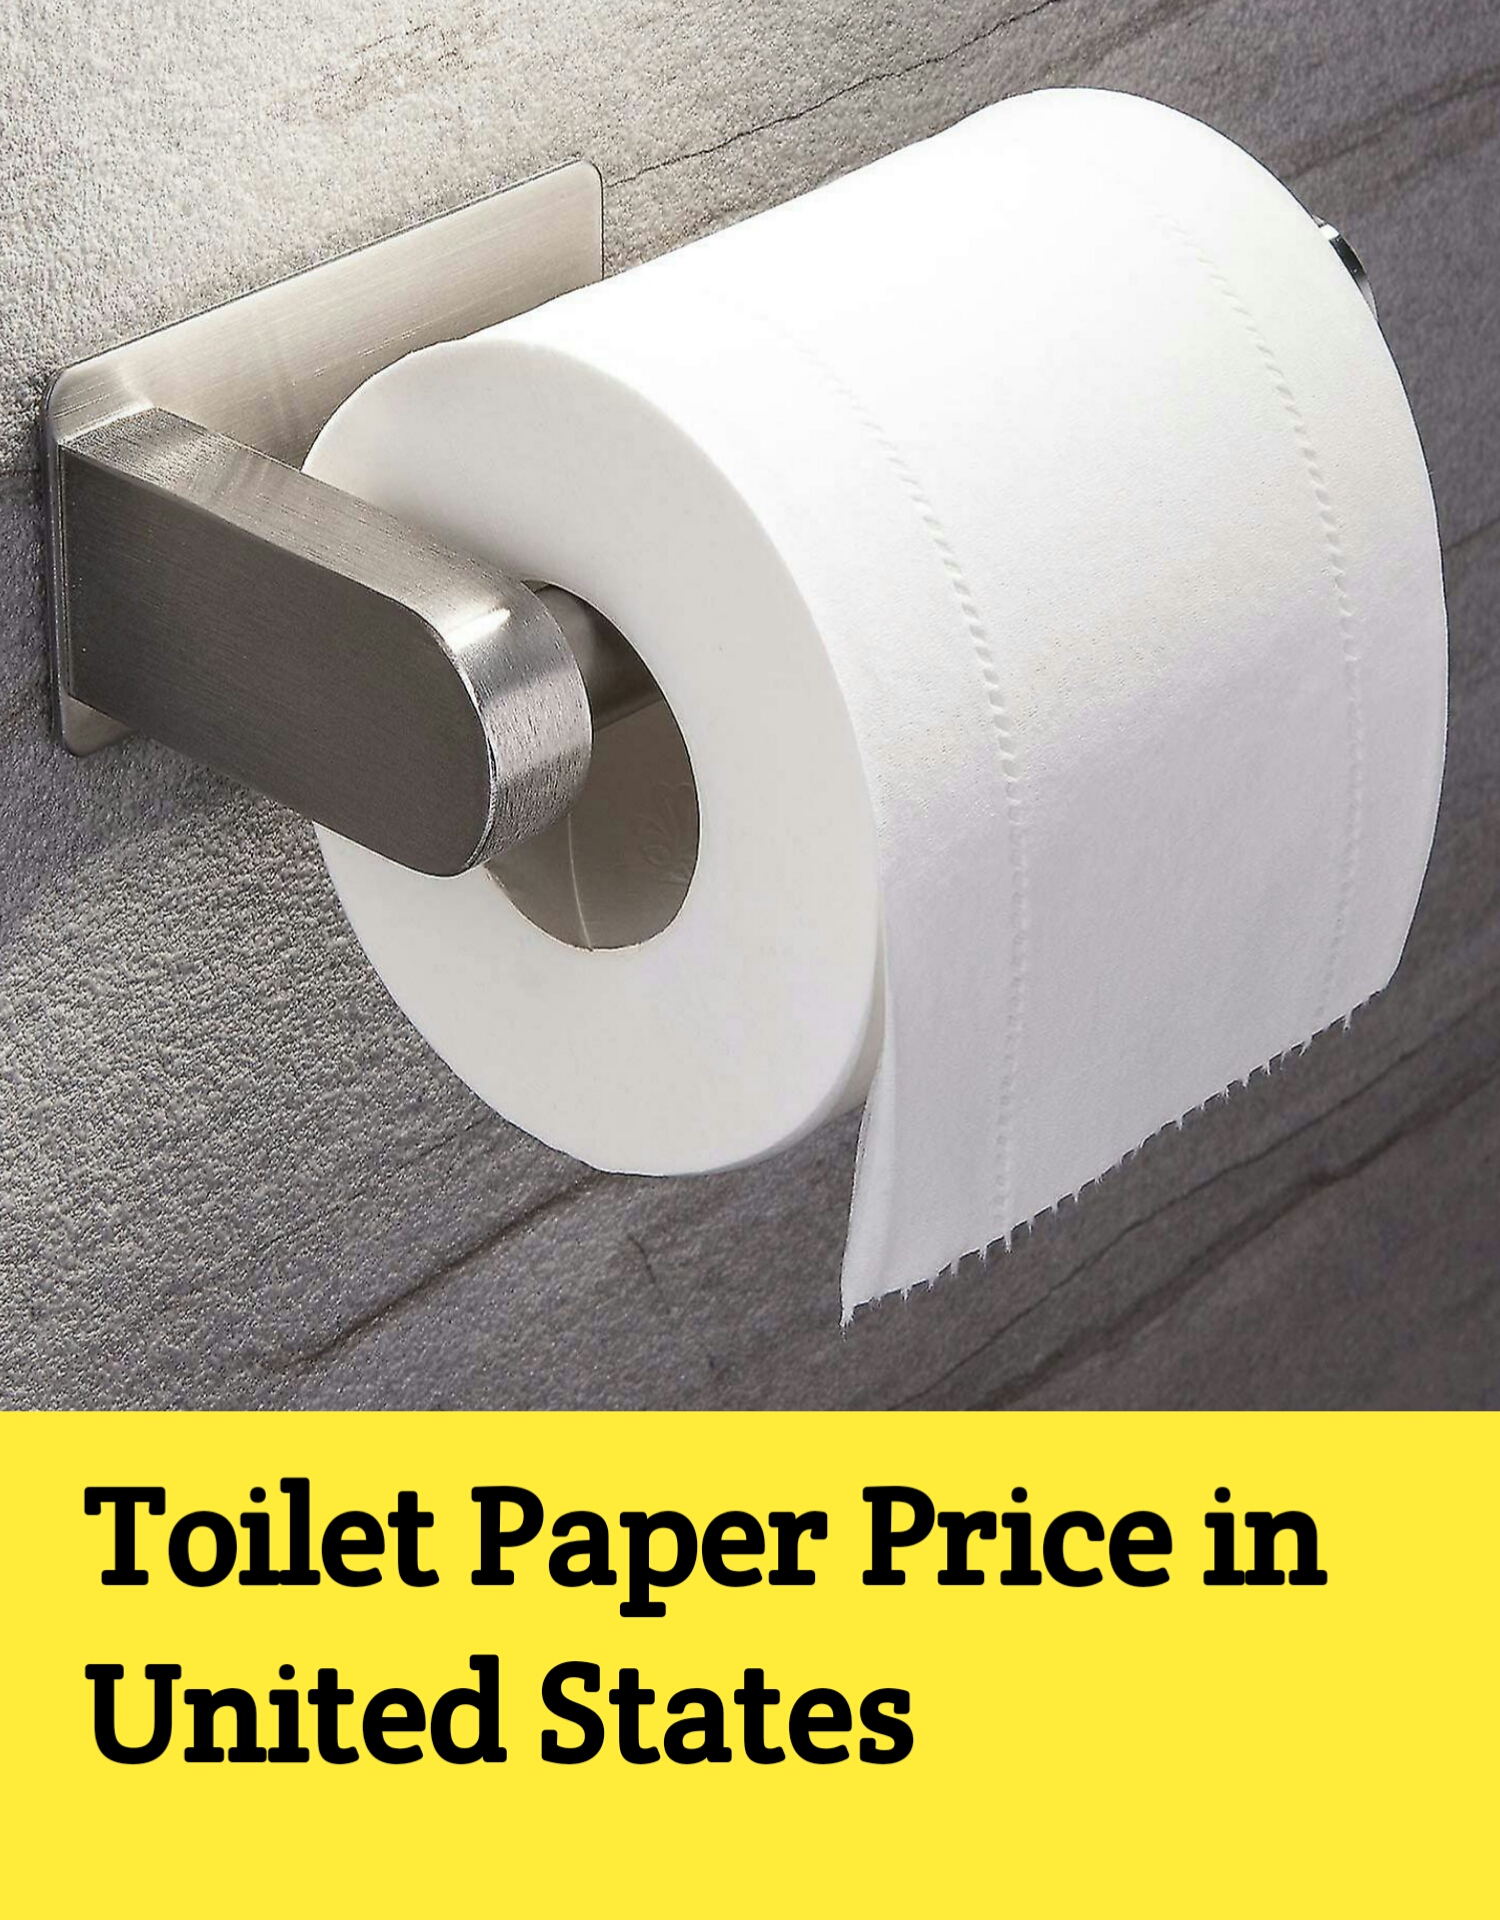 Toilet Paper Prices in the USA